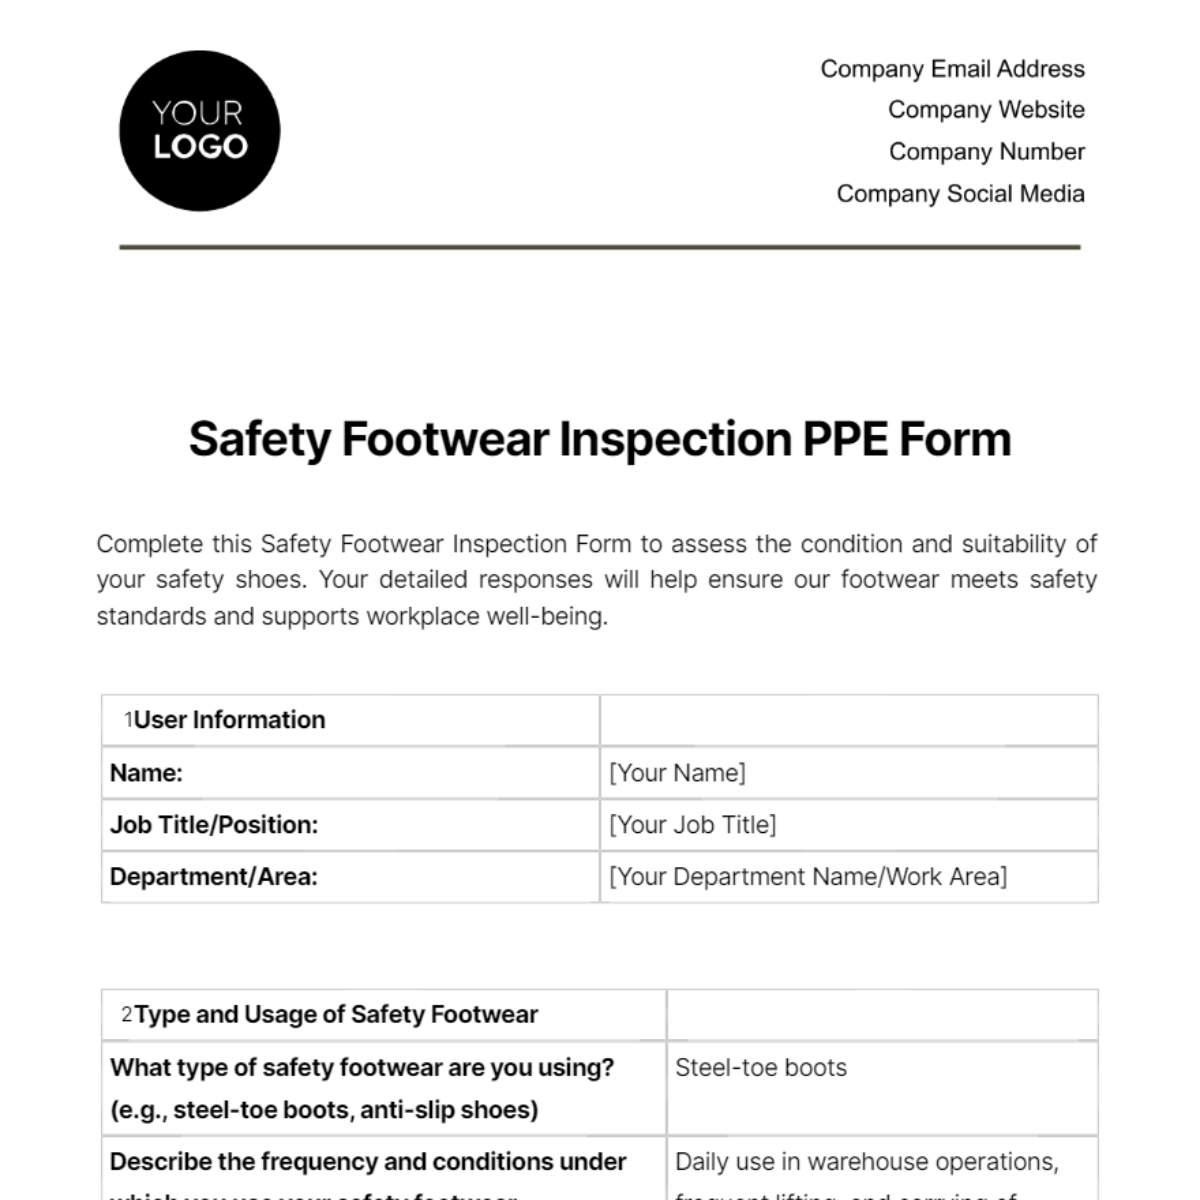 Safety Footwear Inspection PPE Form Template